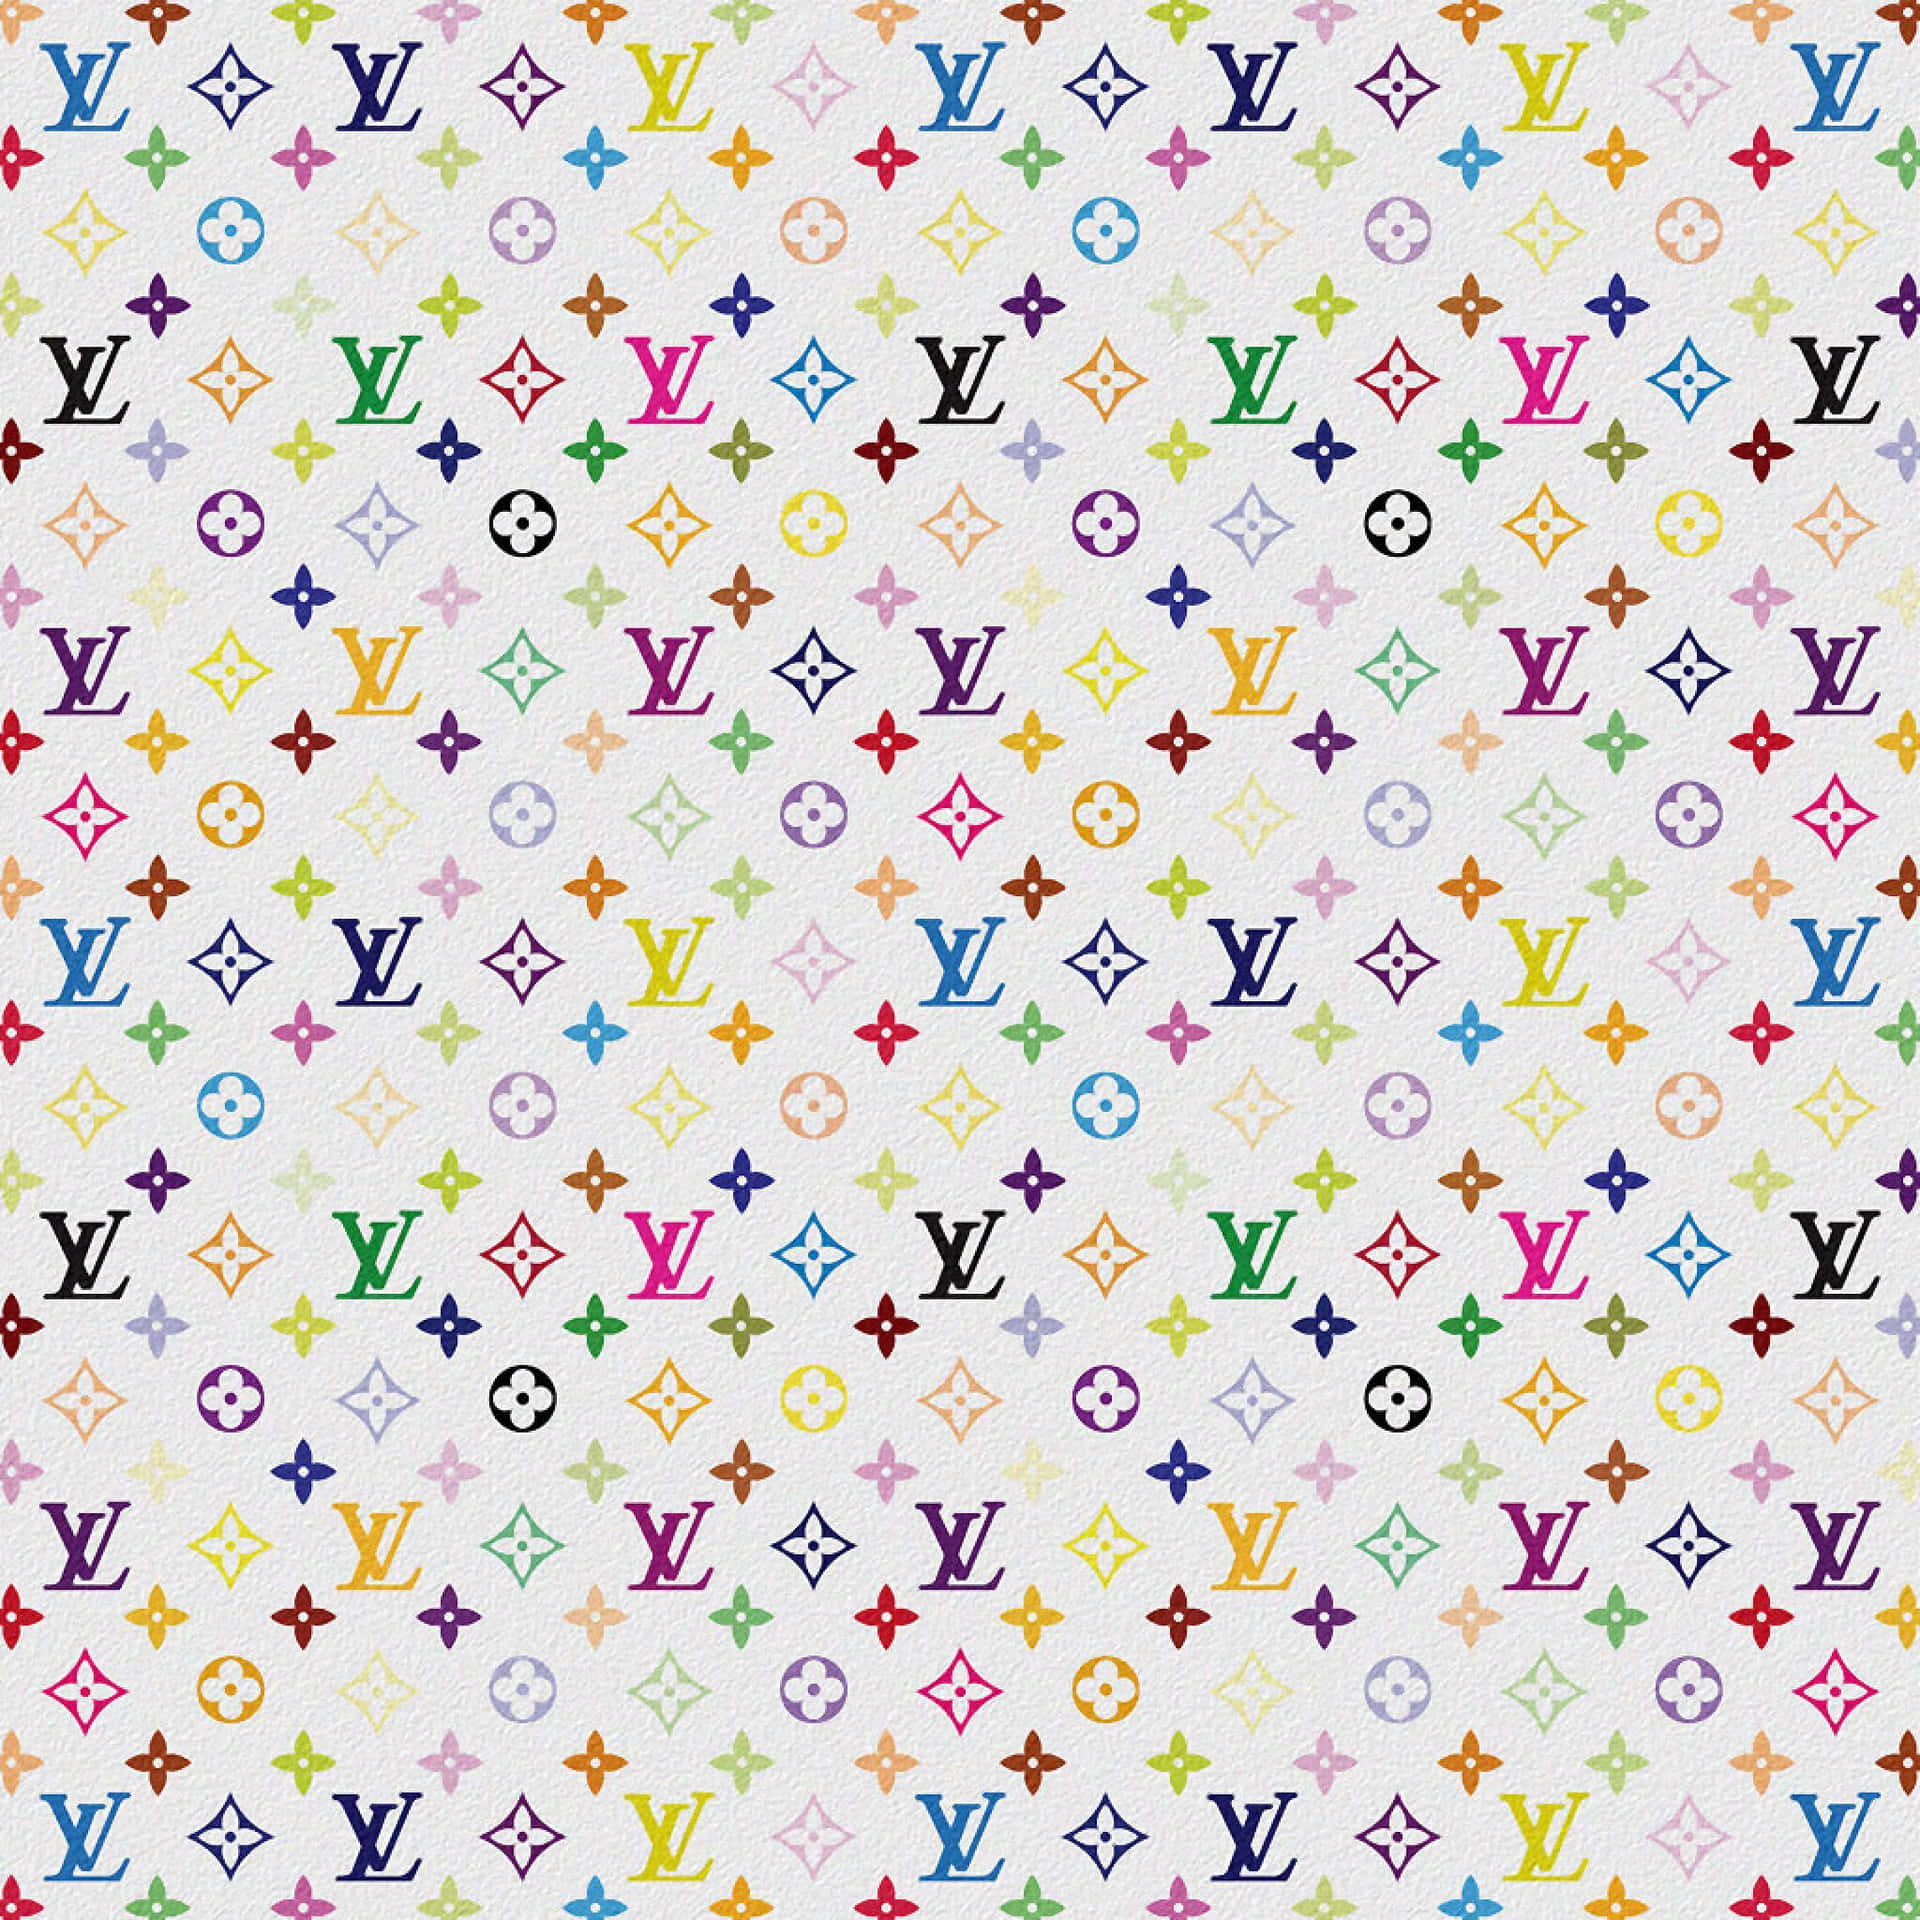 Brighten up your day with a bold Louis Vuitton print. Wallpaper